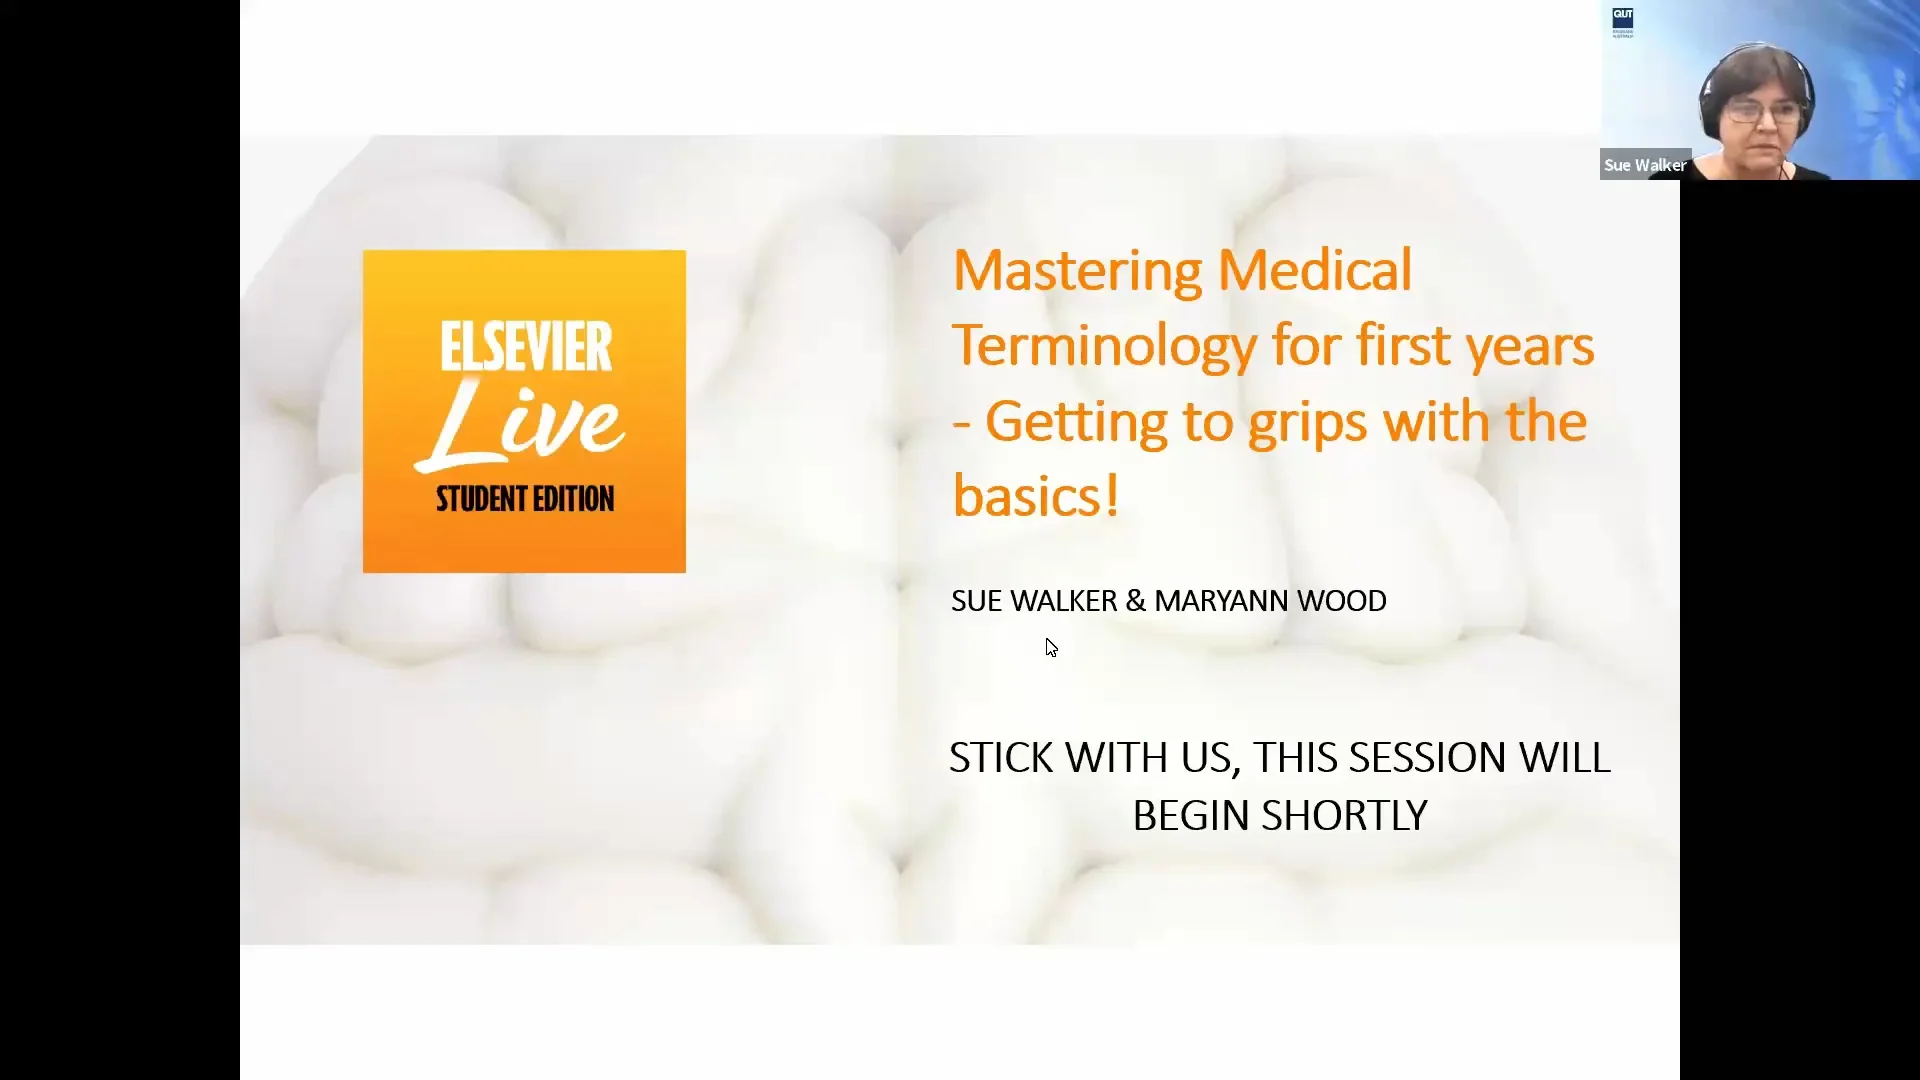 Mastering Medical Terminology for first years